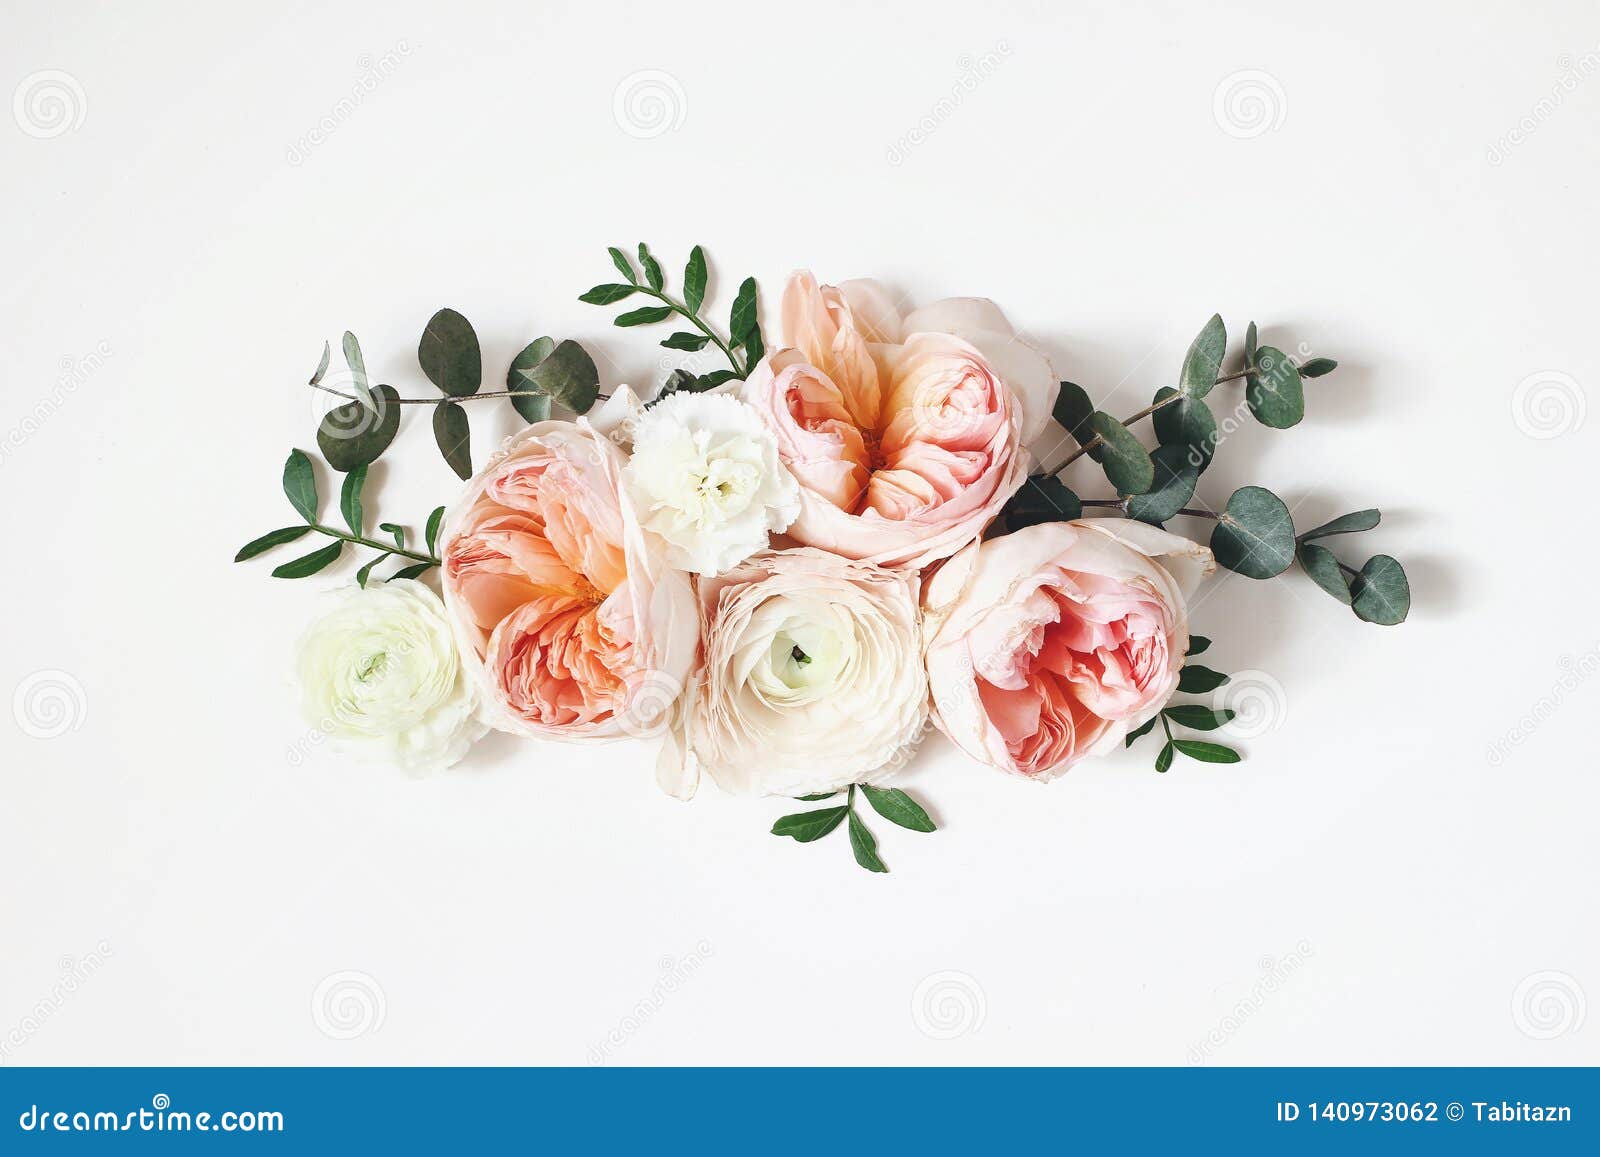 floral arrangement, web banner with pink english roses, ranunculus, carnation flowers and green leaves on white table